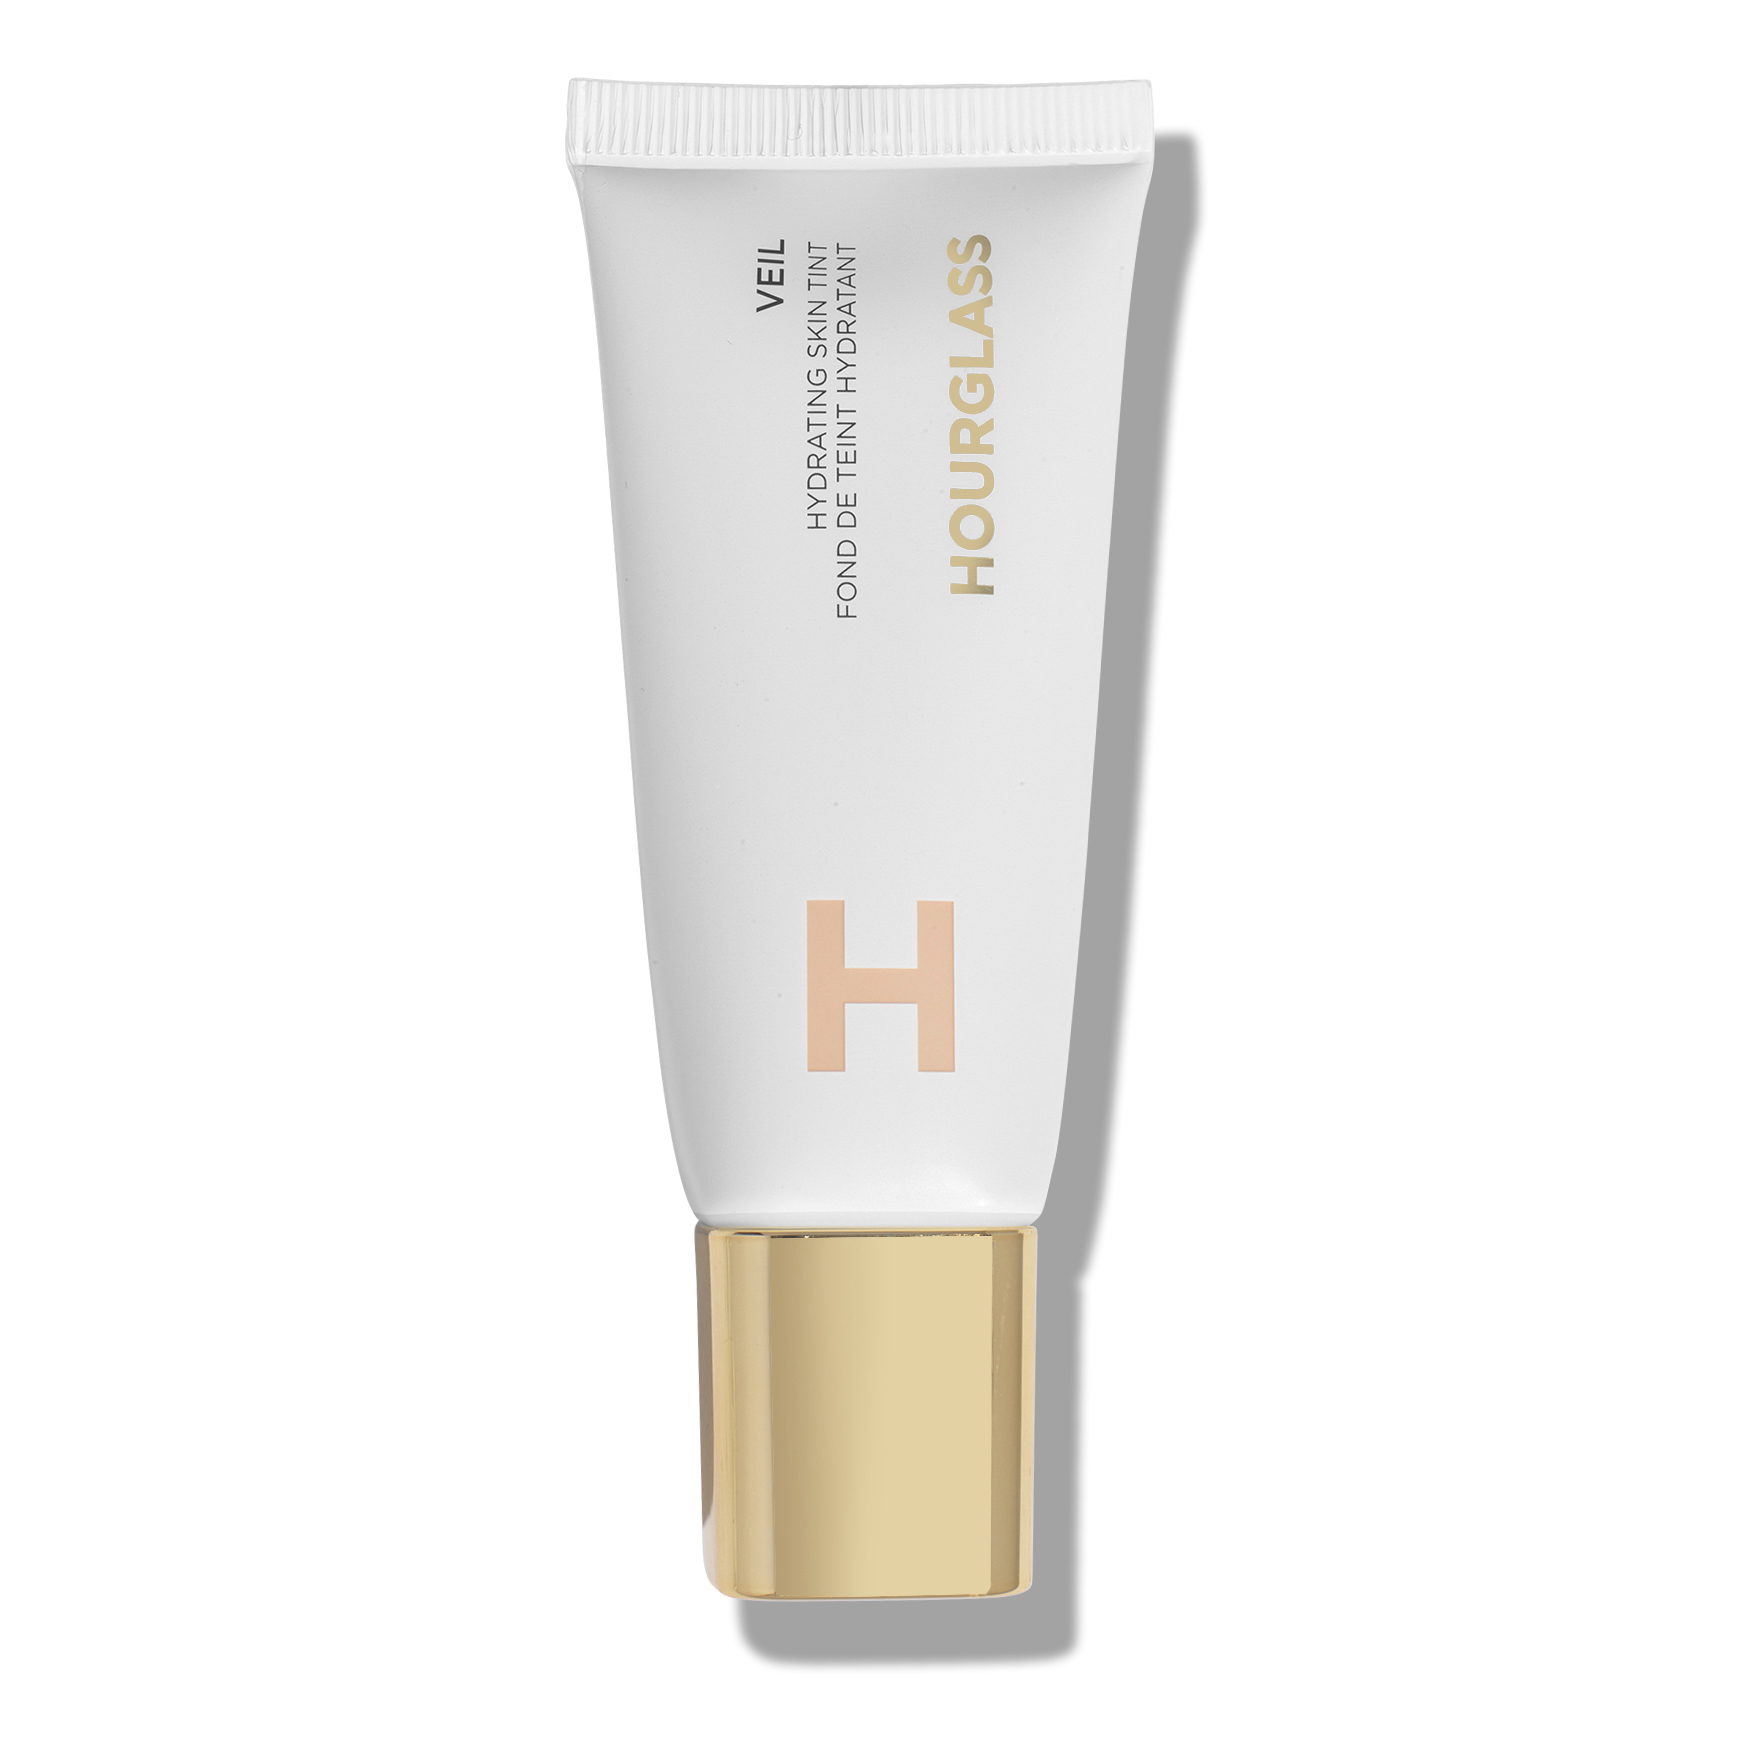 Hourglass Veil Hydrating Skin Tint | Space NK